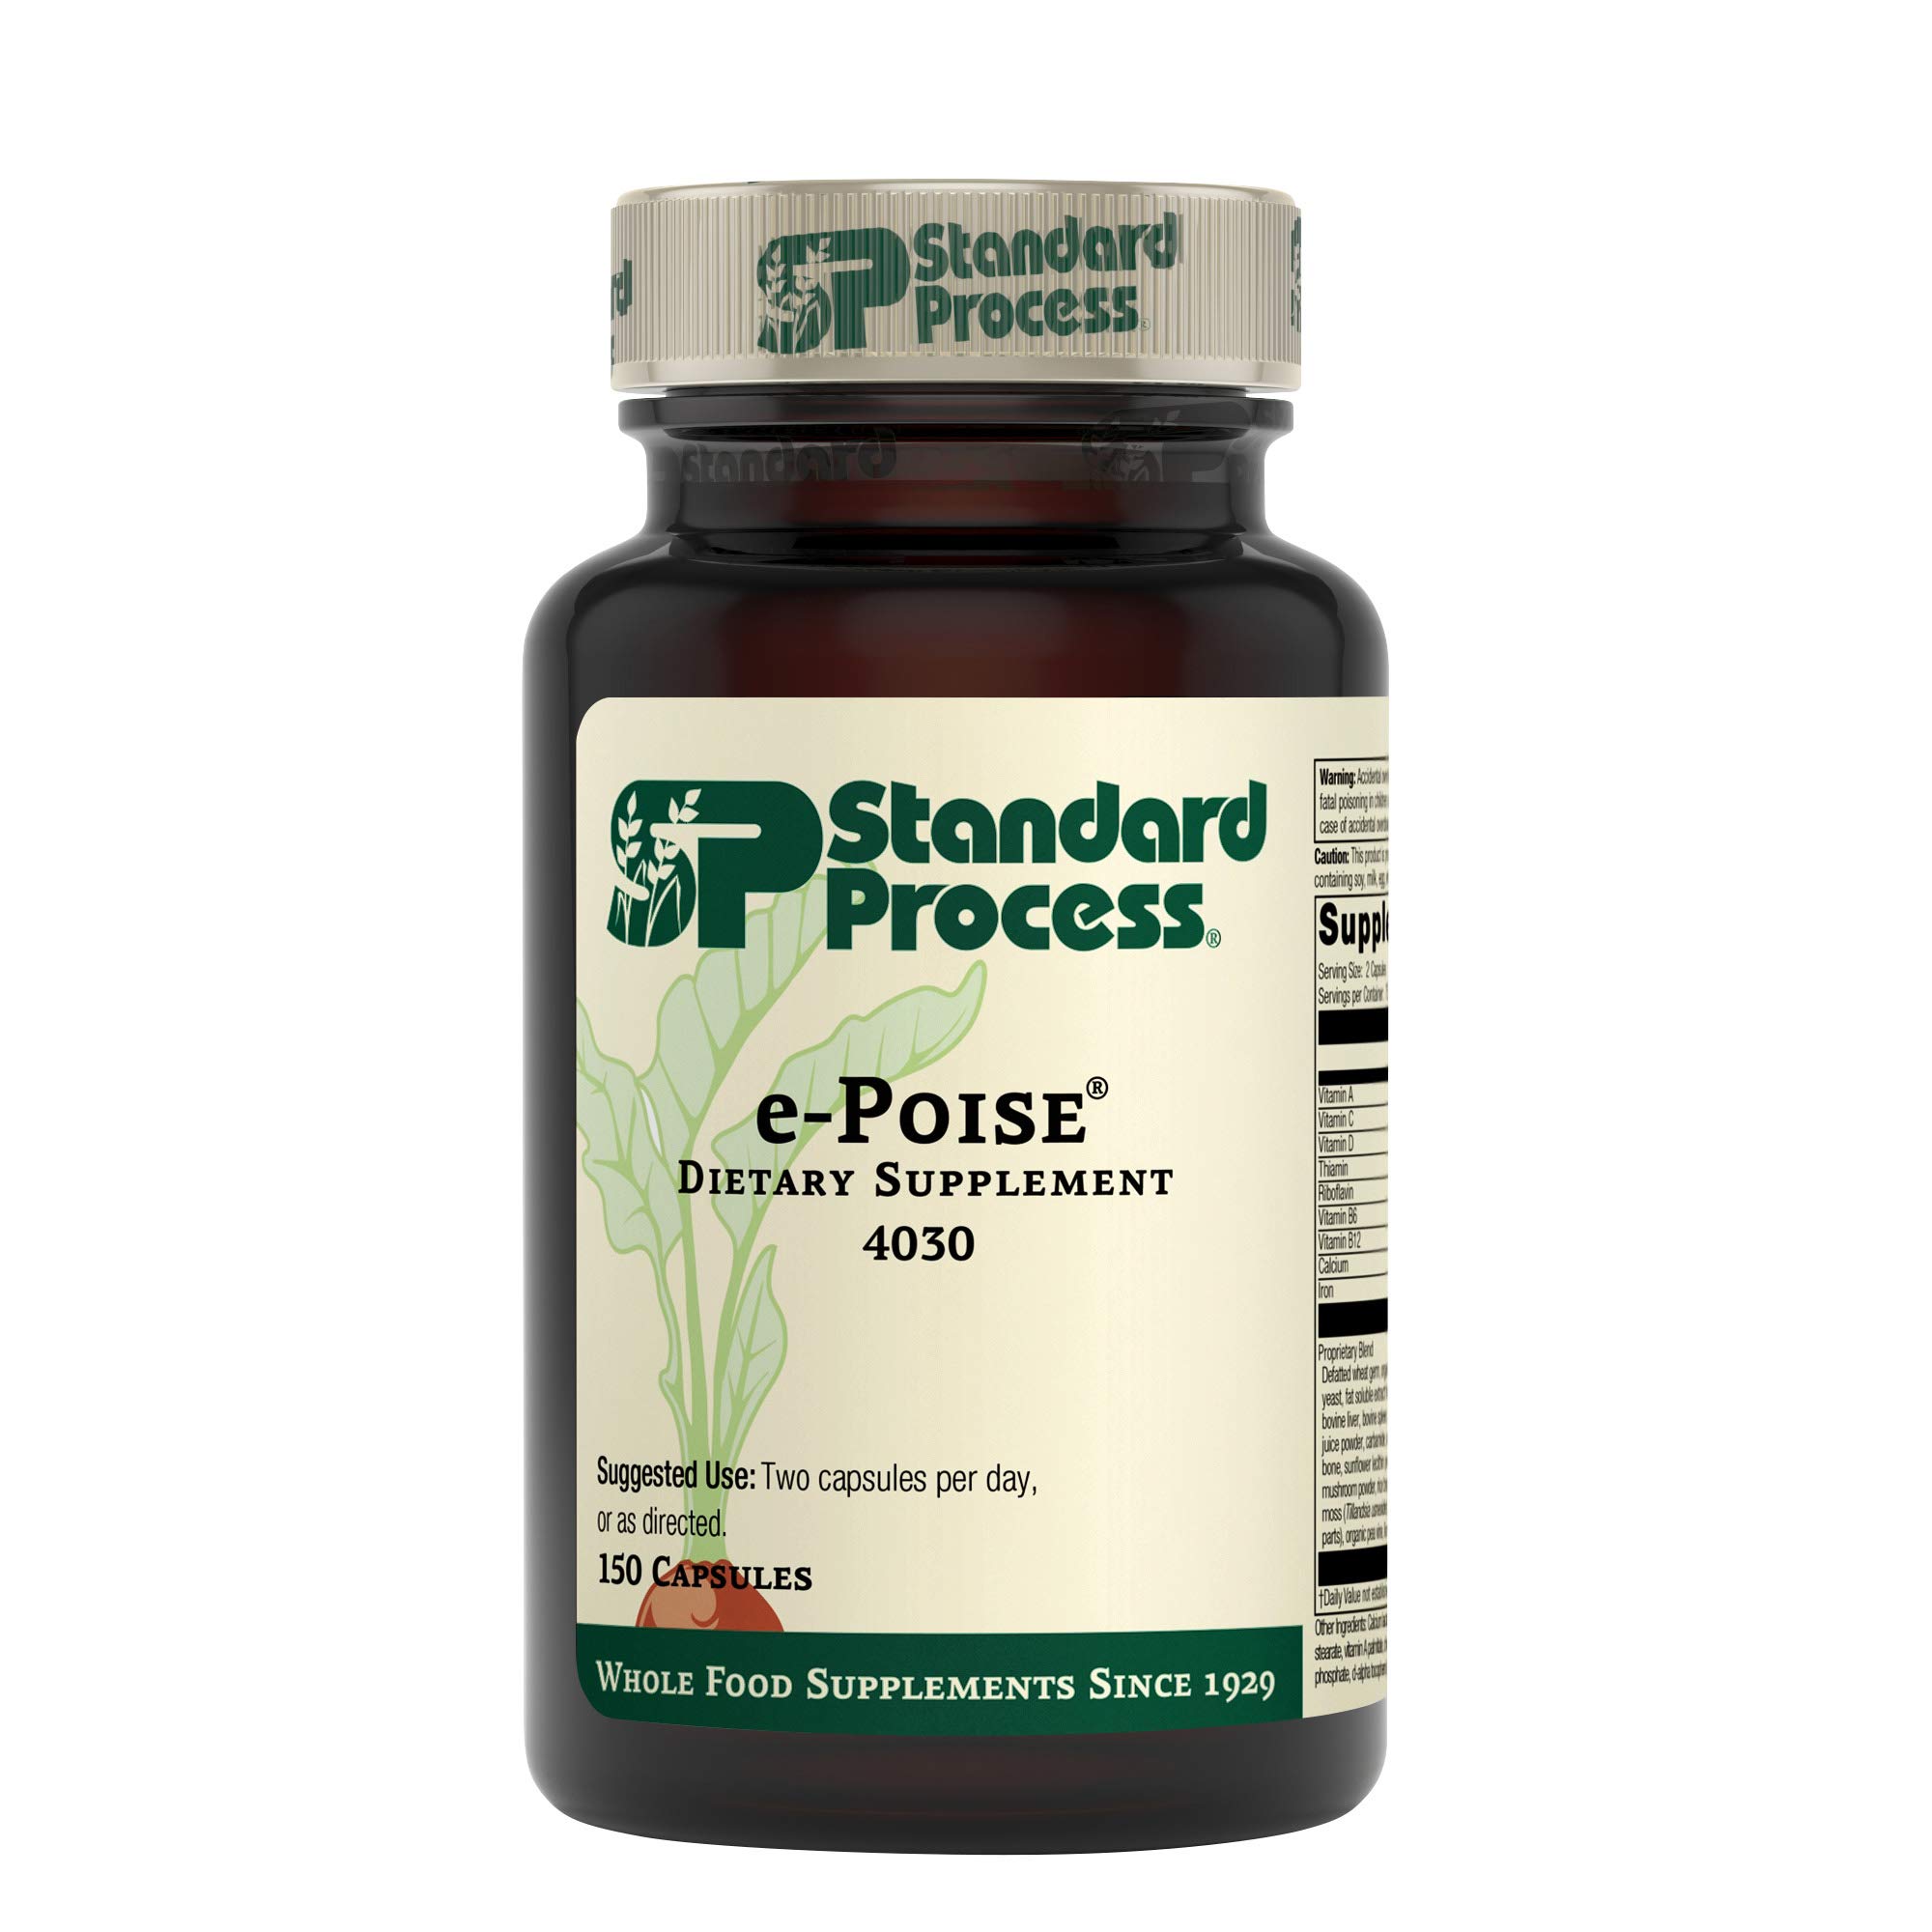 Standard Process e-Poise - Whole Food Energy, Vitality, and Antioxidant Support with Riboflavin, Vitamin B6, Thiamine, Wheat Germ, Vitamin A, Flaxs...